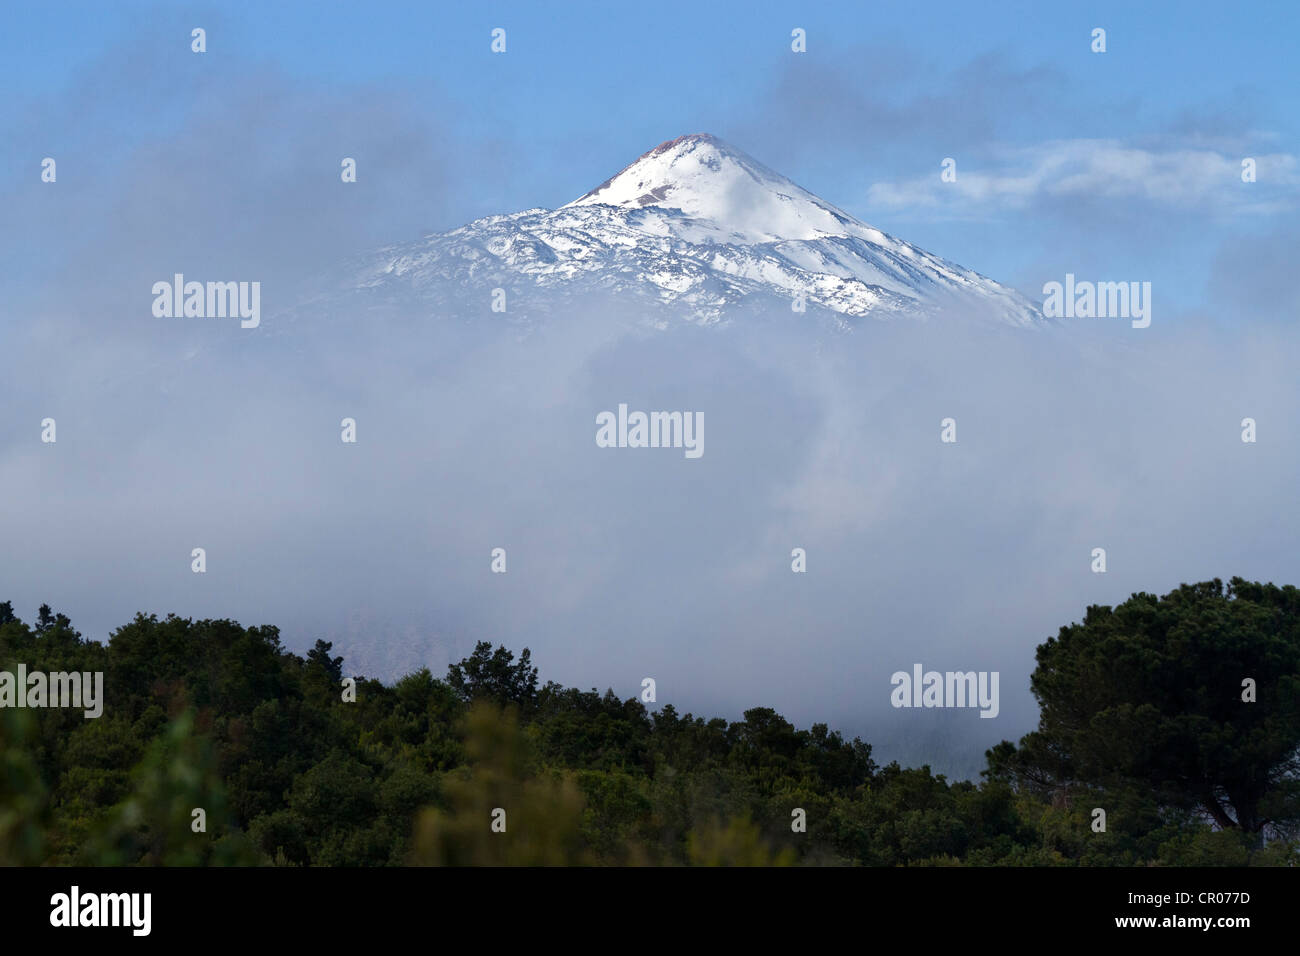 View of the Pico del Teide mountain above the clouds, Tenerife, Canary Islands, Spain, Europe Stock Photo